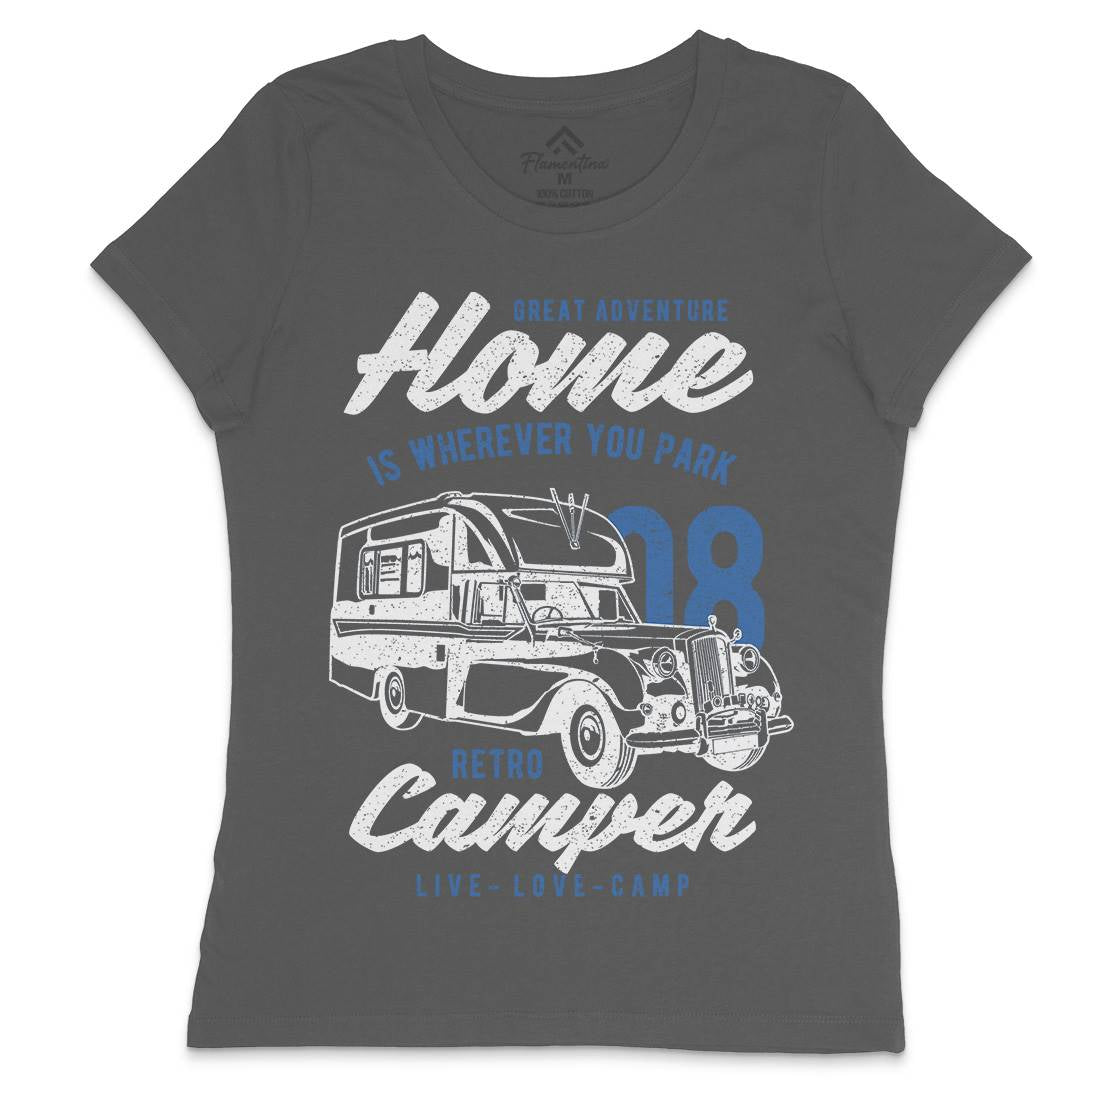 Retro Campers Womens Crew Neck T-Shirt Nature A740